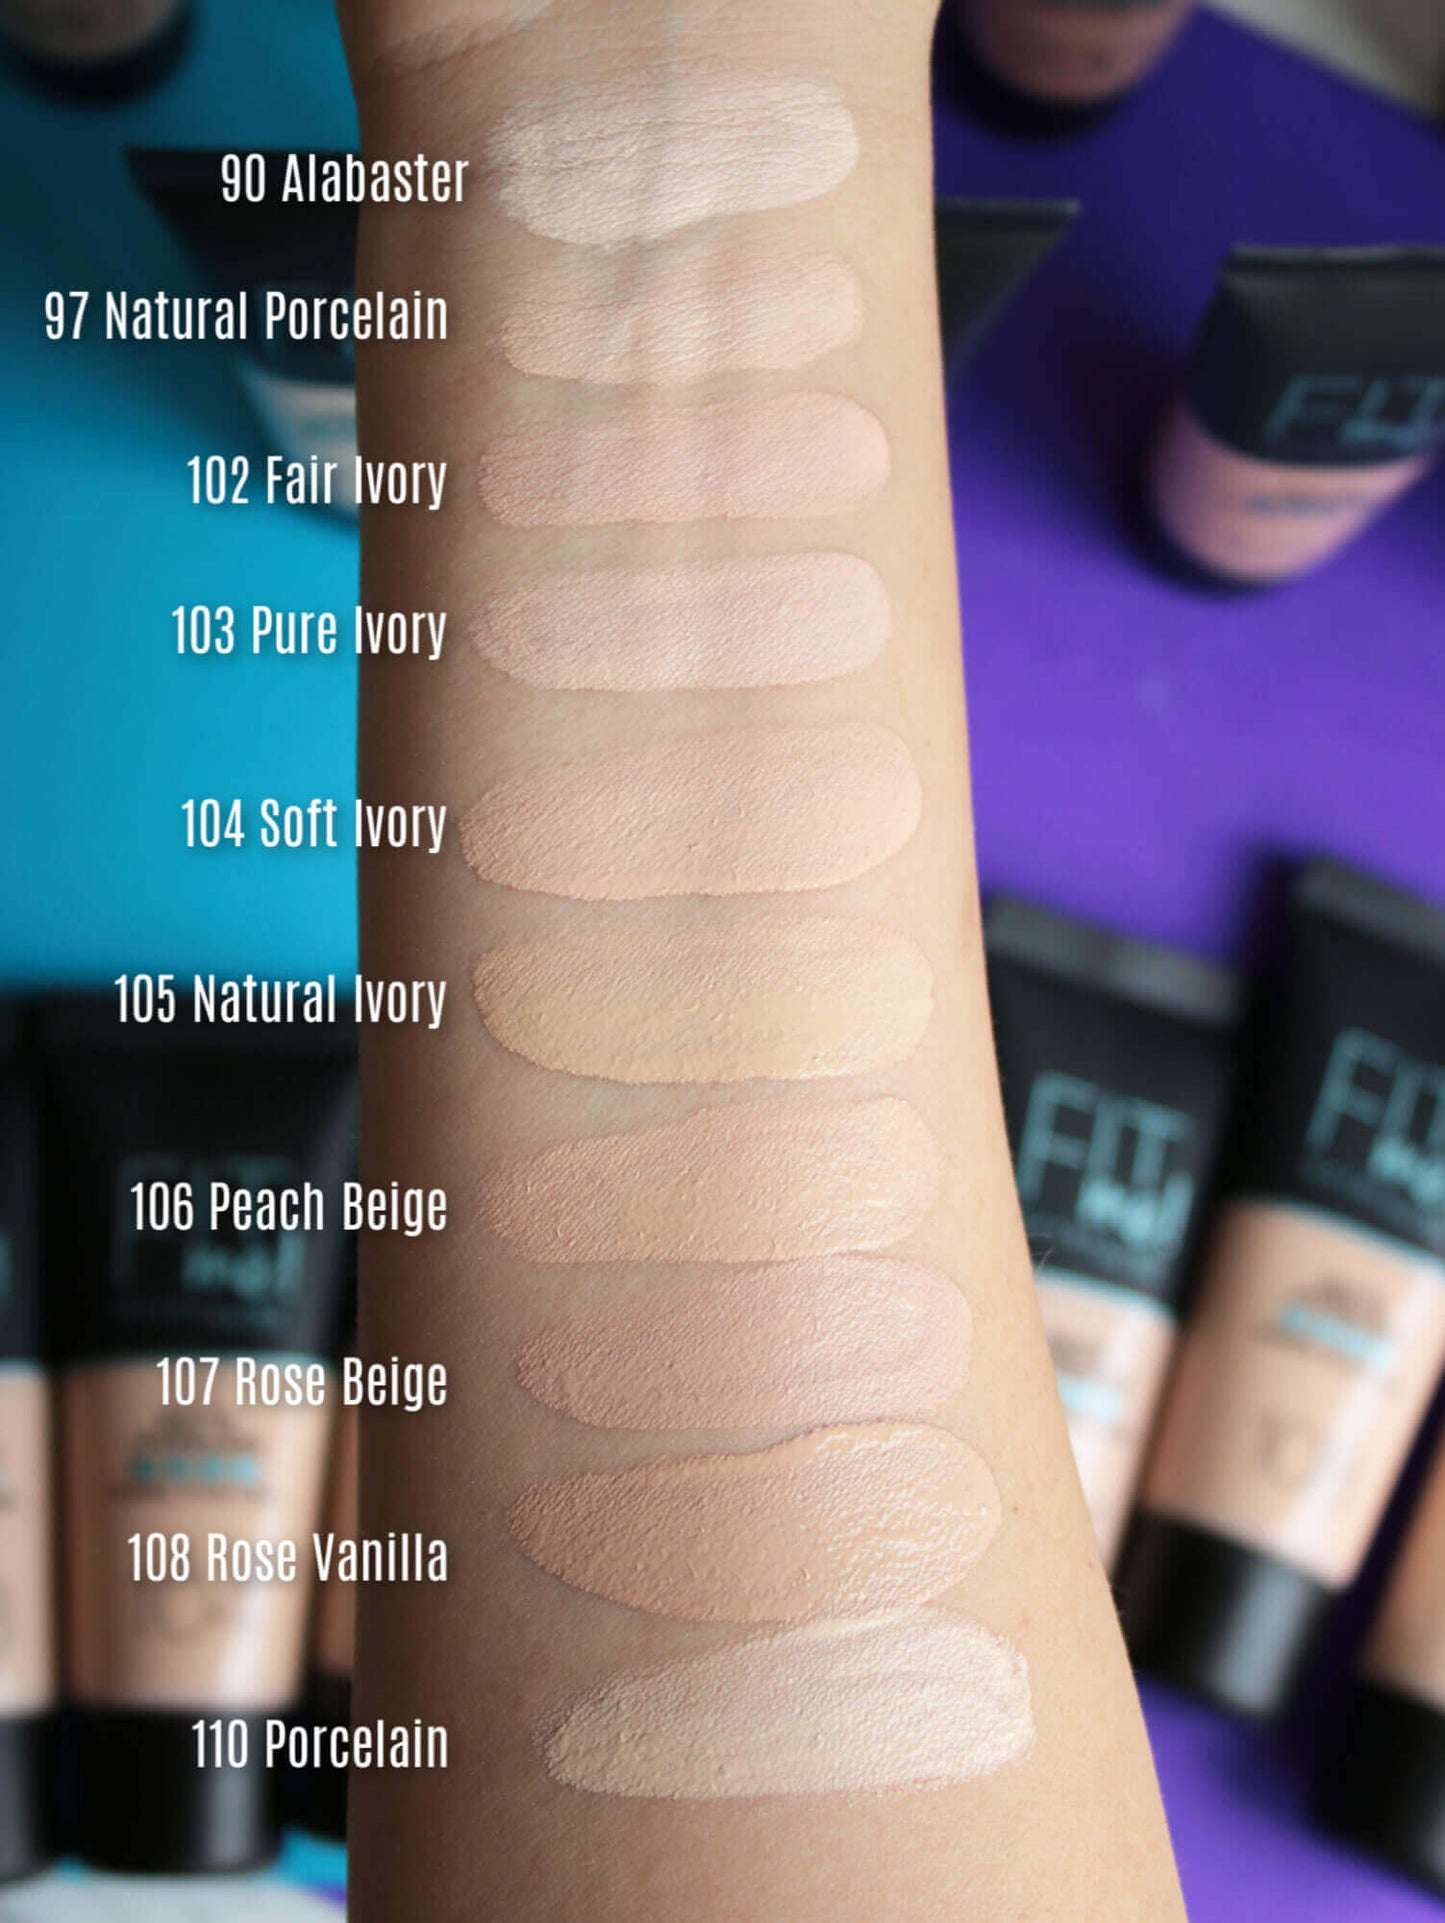 Maybelline Fit Me Matte And Poreless Foundation 105 Natural Ivory